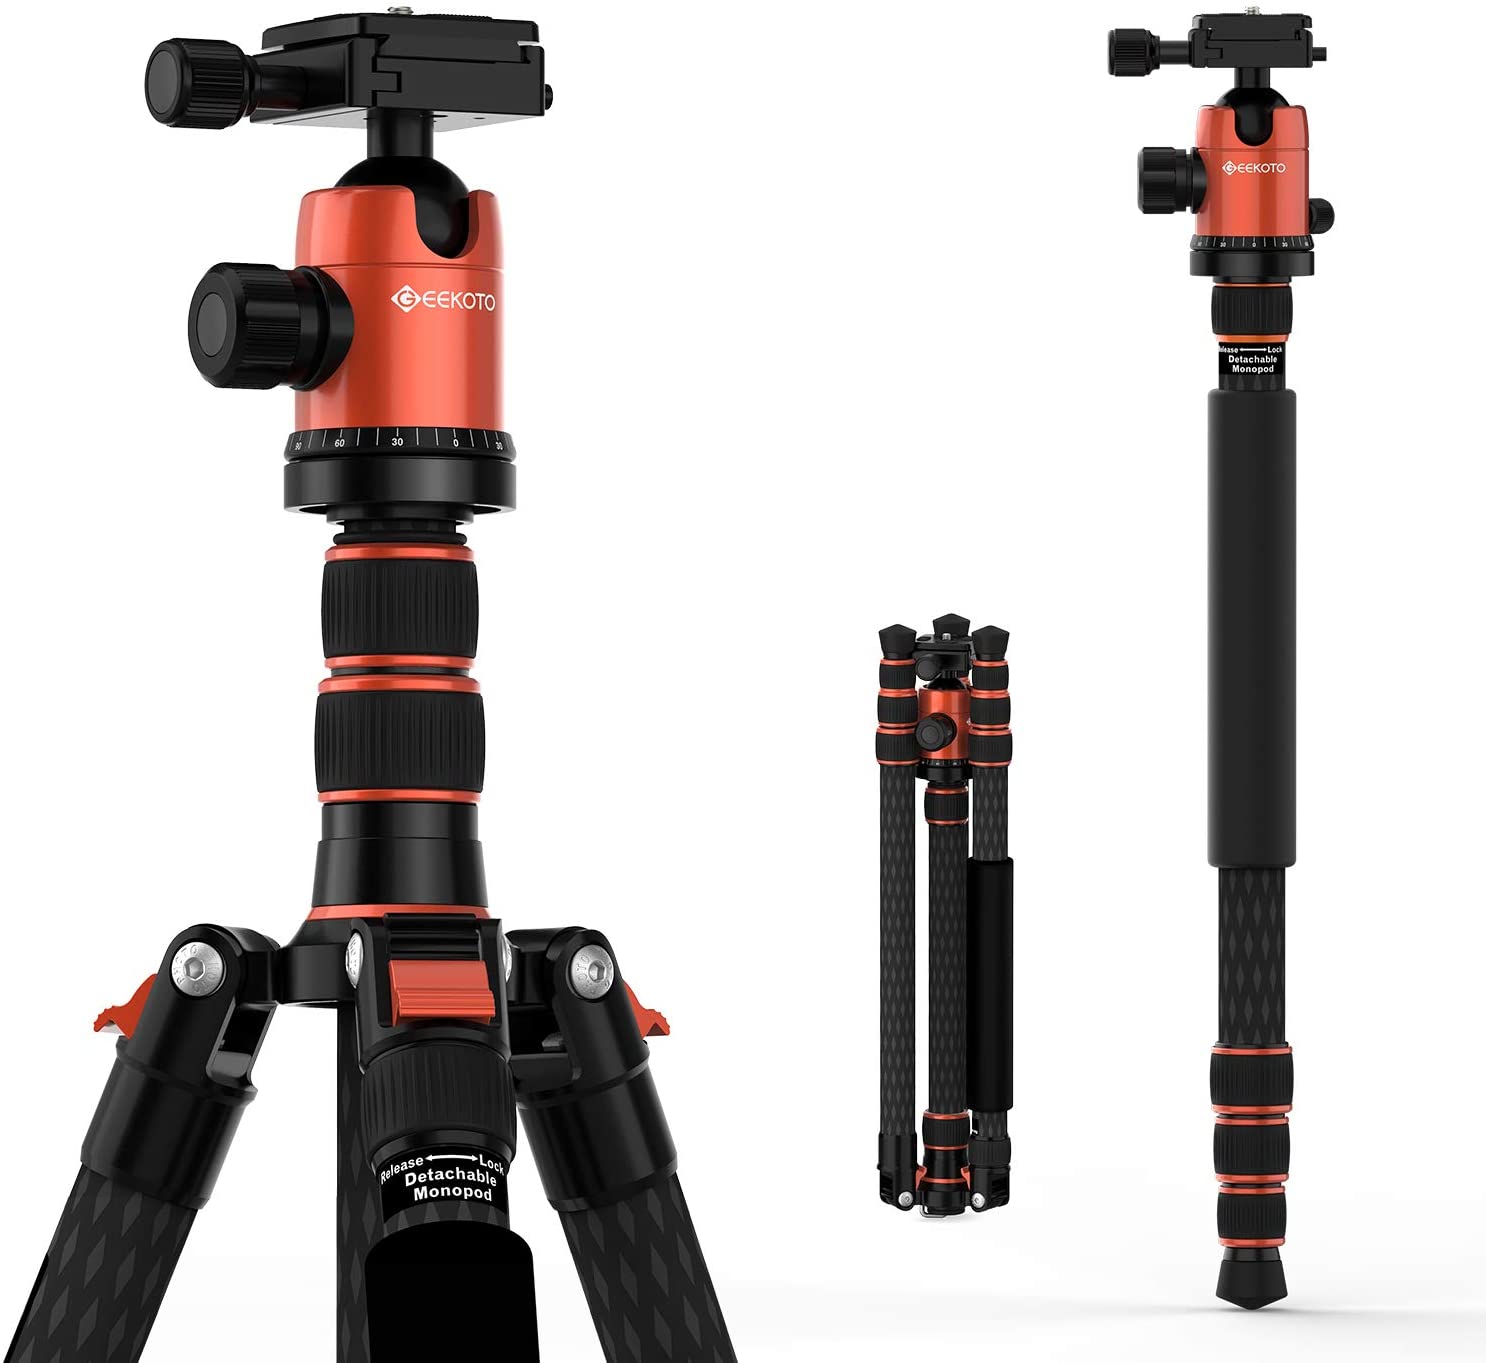 PHOPIK 79 inches Carbon Fiber Camera Tripod Monopod with 360 Degree Ball Head,1/4 inch Quick Shoe Plate,Professional Tripod Load up to 26.5 pounds 2 in 1 Collapsible Ultra Lightweight Travel Tripod 